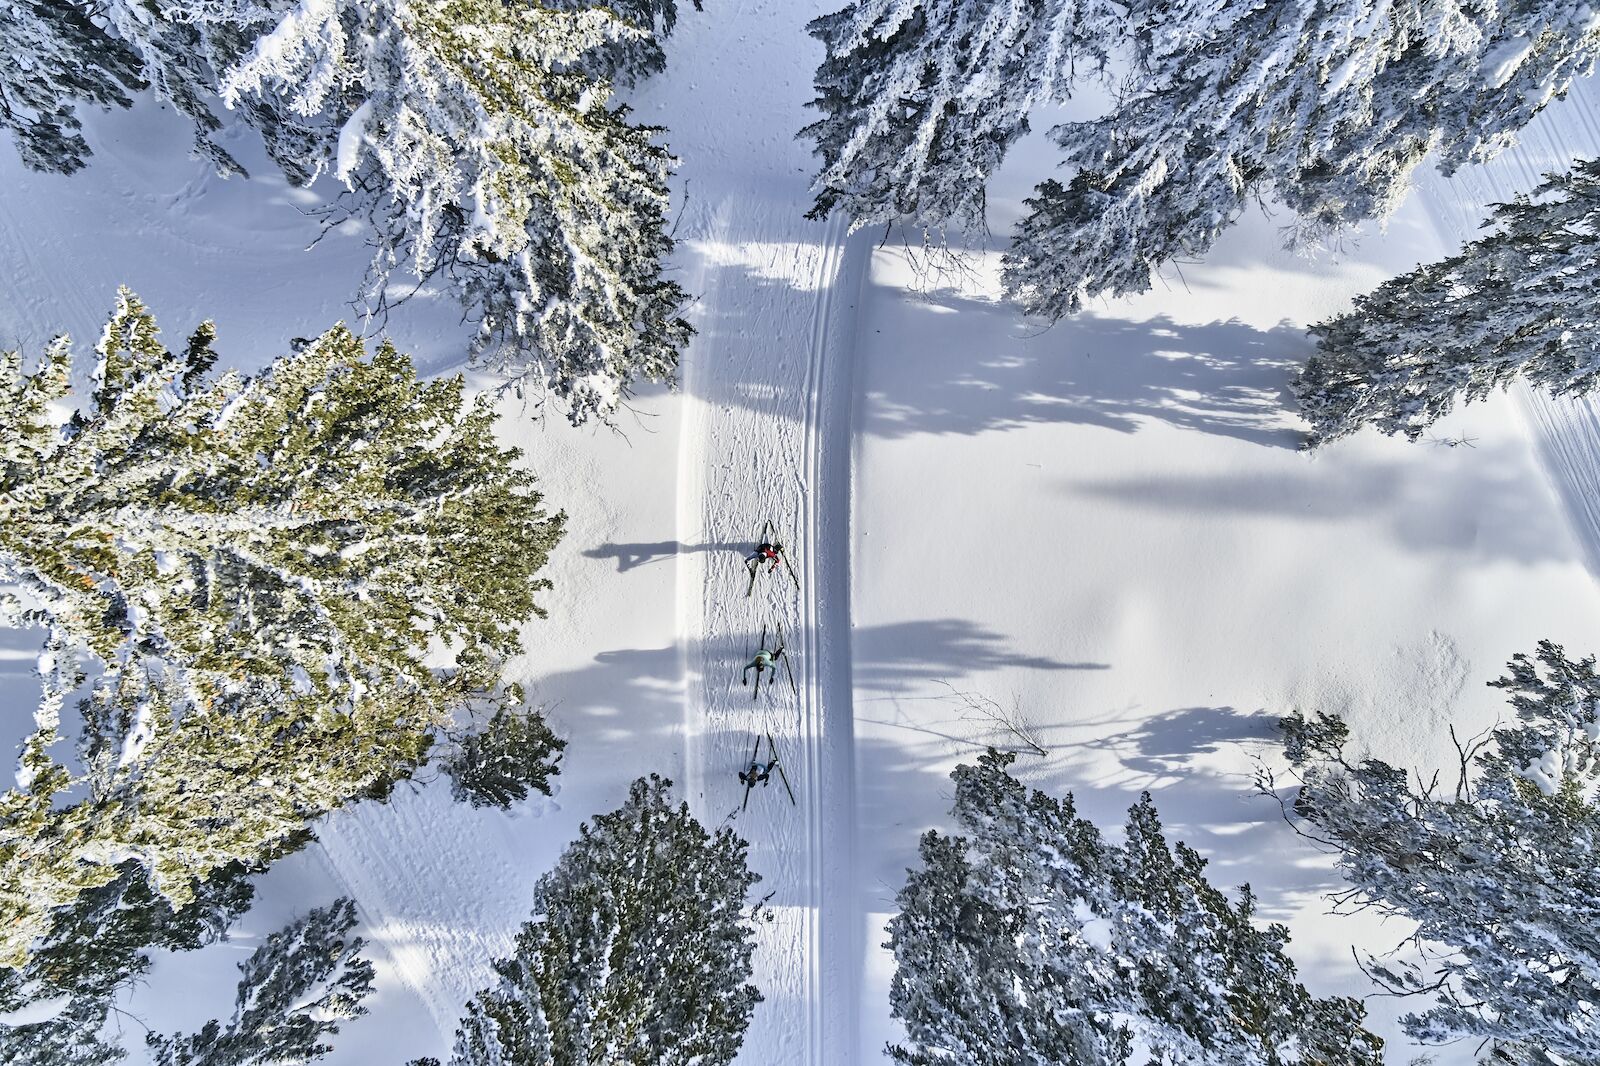 Cross country skiing in the bavarian forest as shown from above